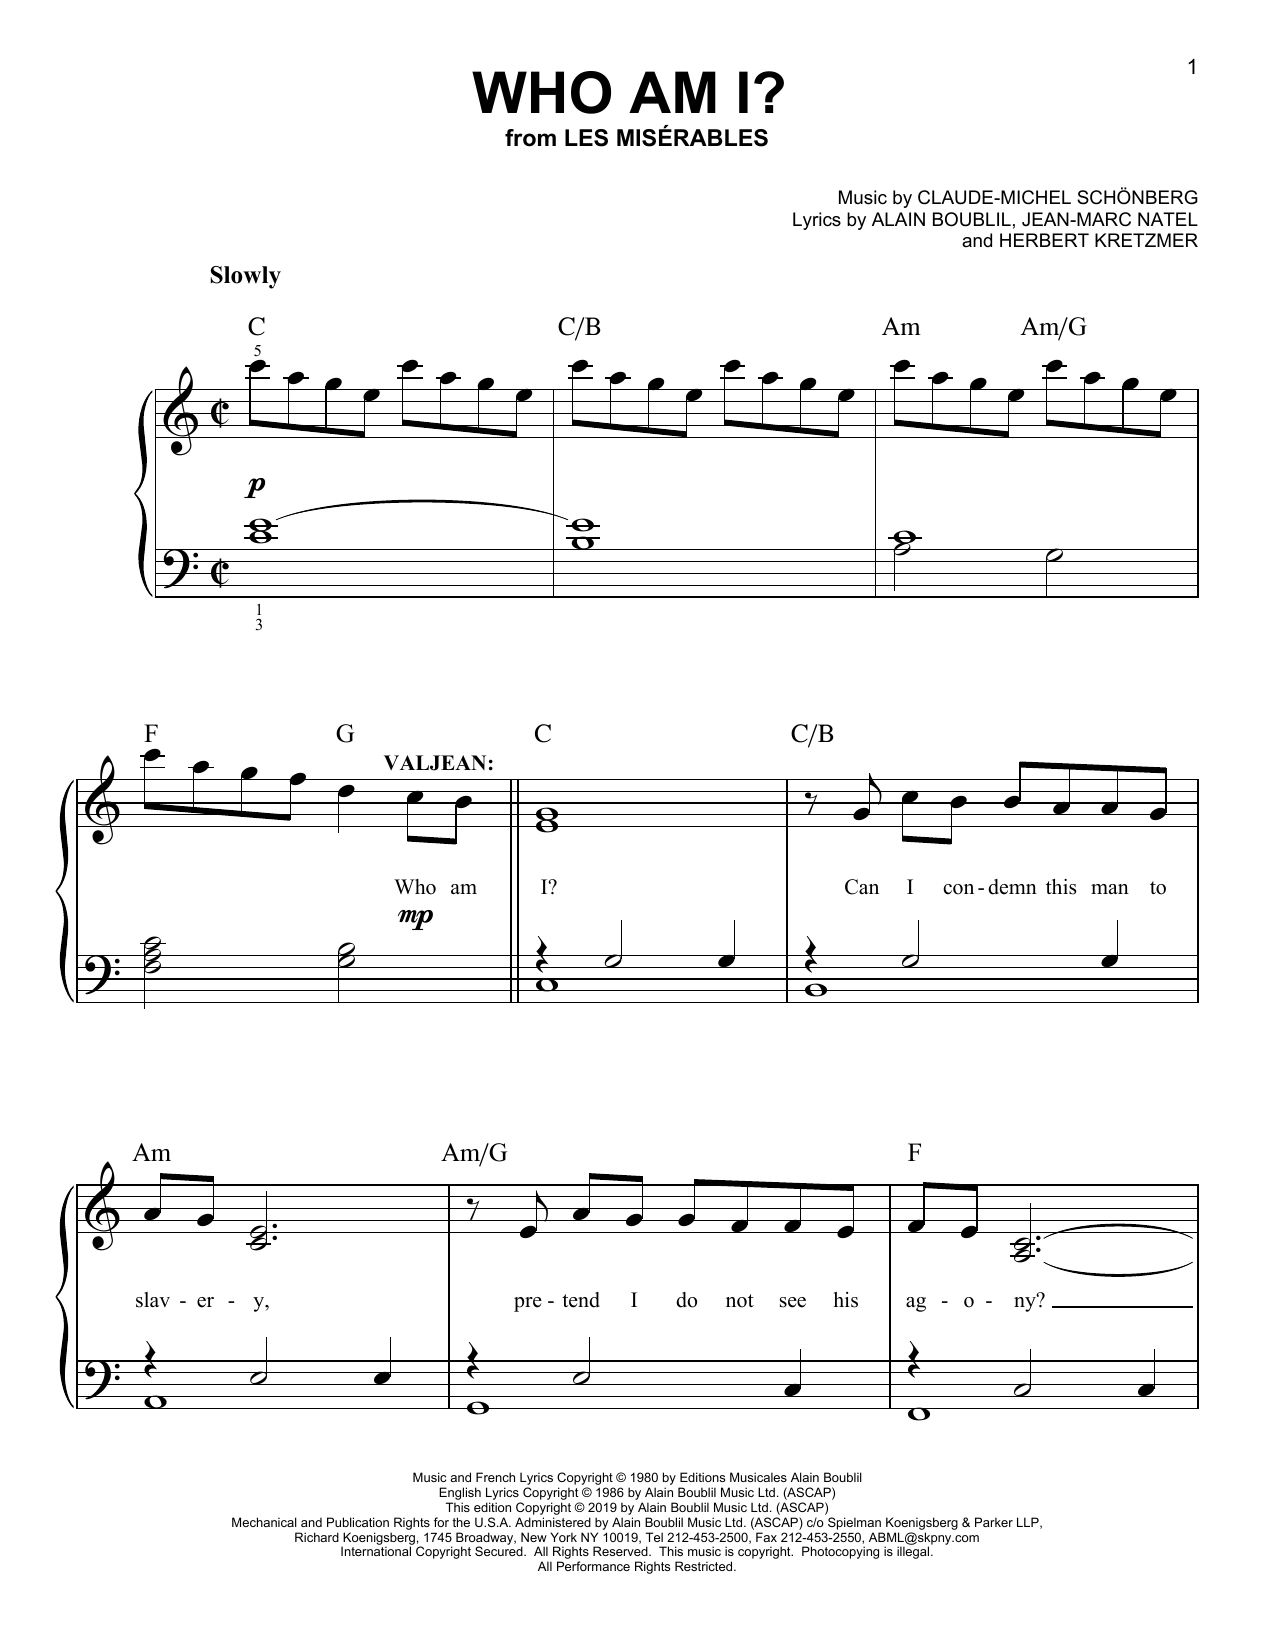 Claude-Michel Schonberg Who Am I? sheet music notes and chords. Download Printable PDF.